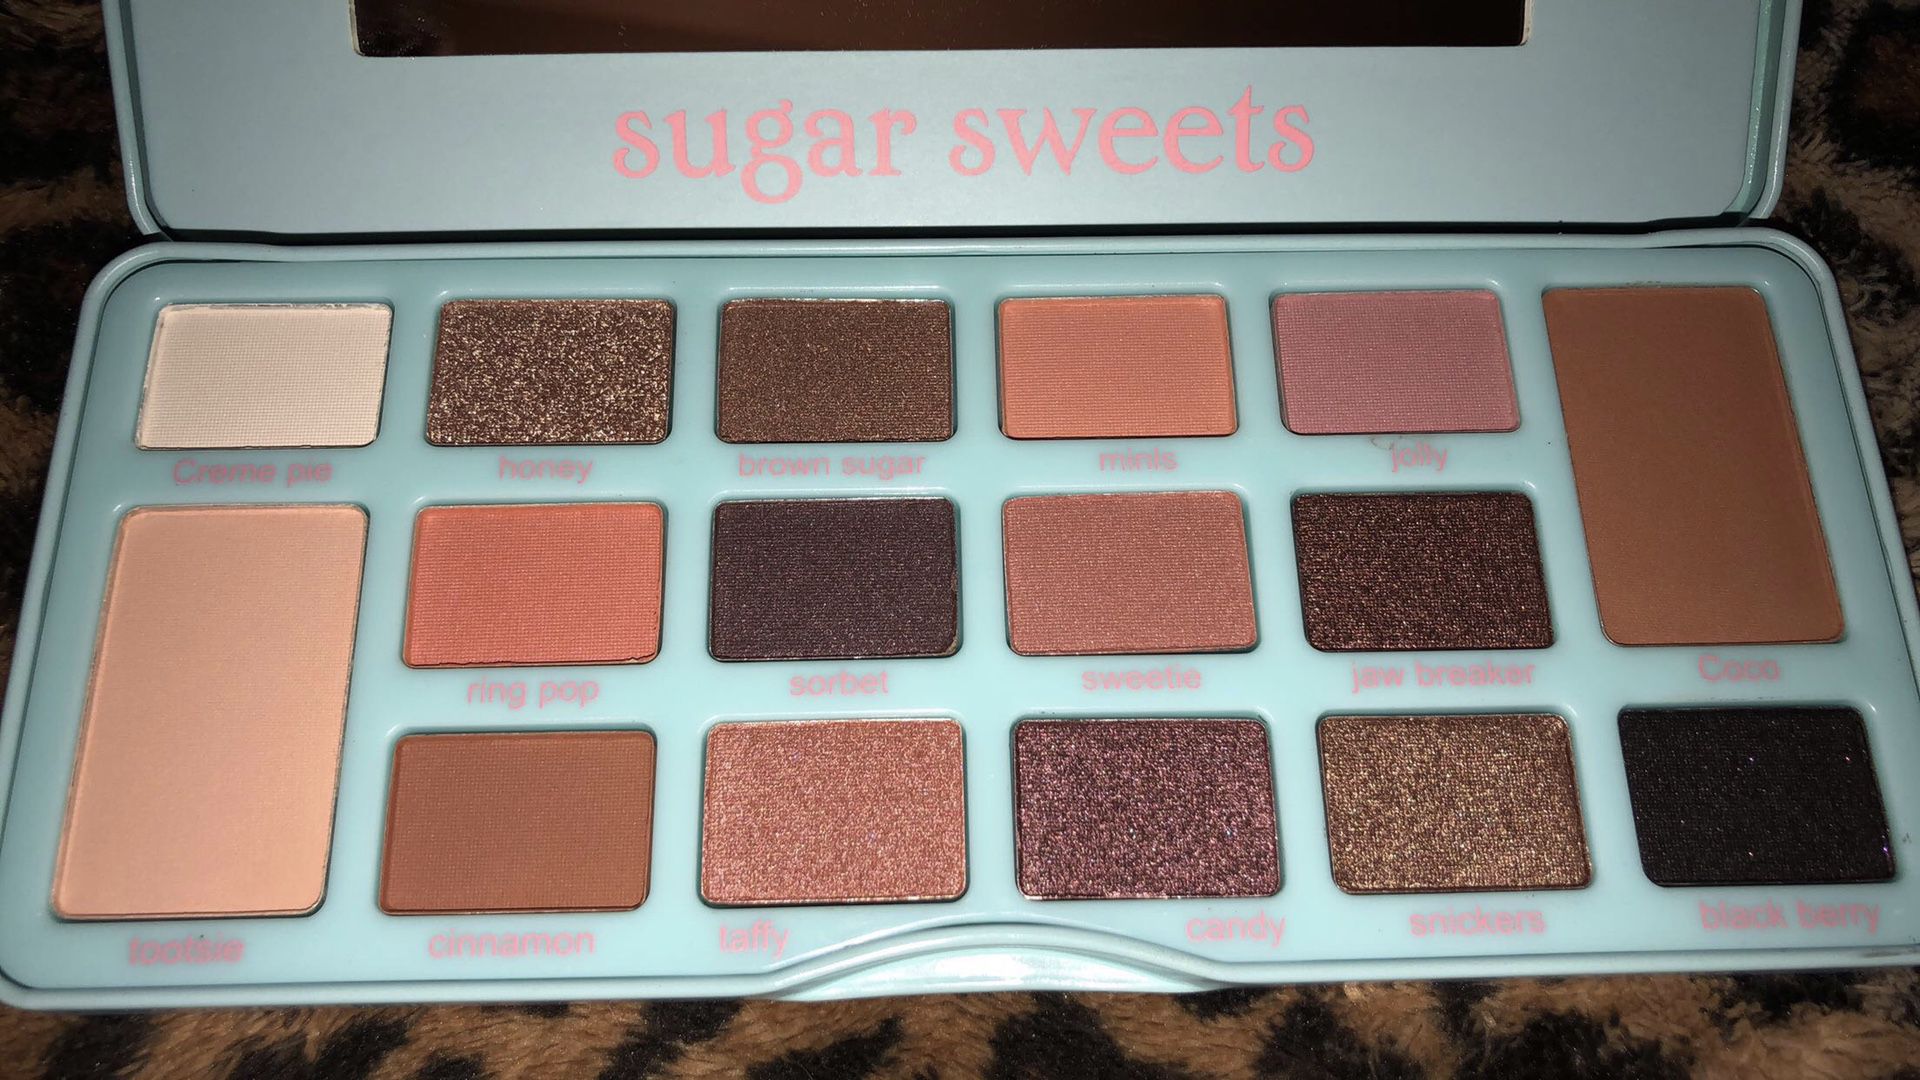 Sugar sweets palette by Beauty Creations